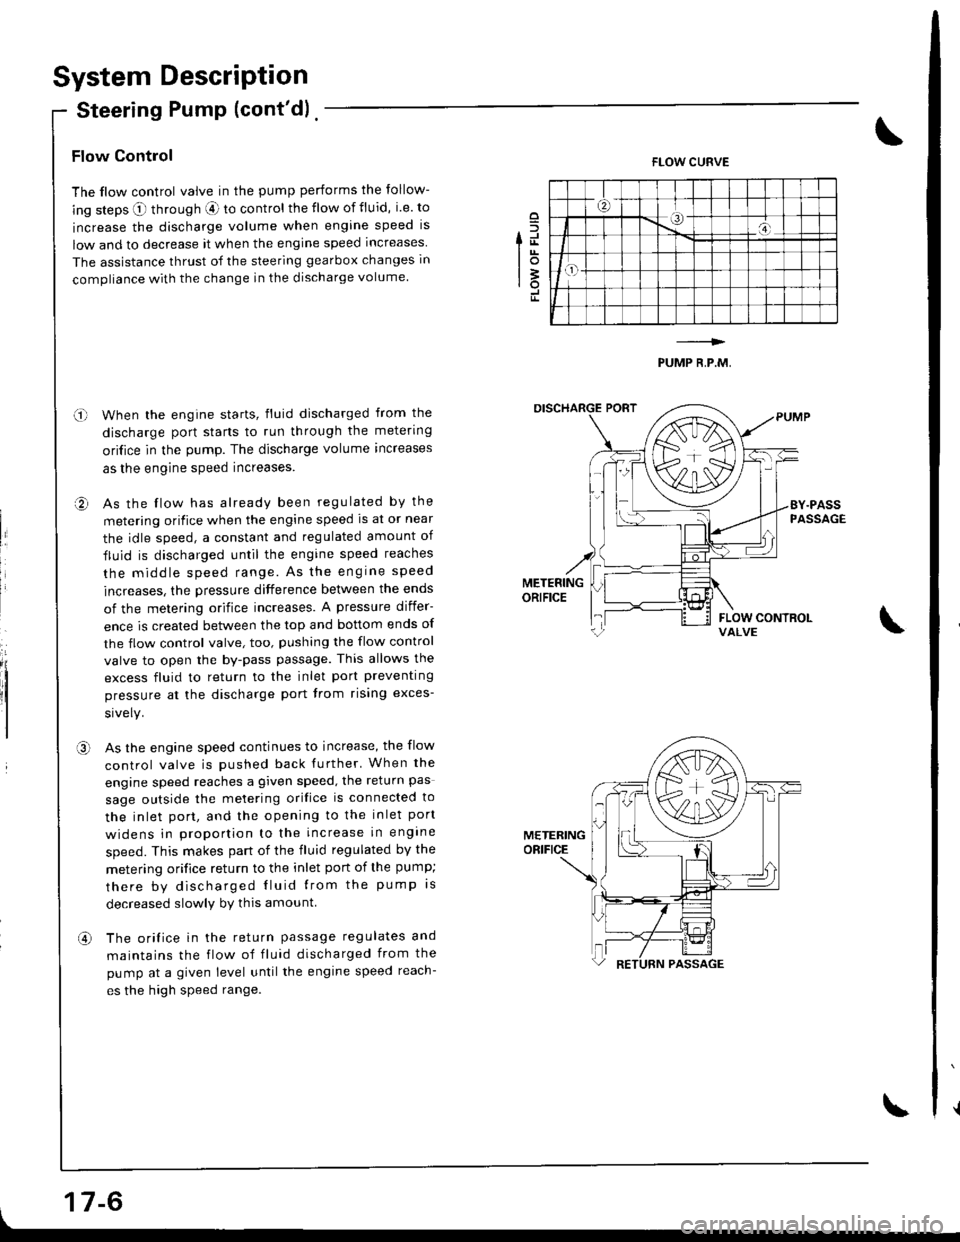 HONDA INTEGRA 1998 4.G Workshop Manual System Description
Steering Pump (contd) .
 
17-6
Flow Control
The flow control valve in the pump performs the follow-
ing steps O through aE ro control the flow of fluid, i.e. to
increase the discha